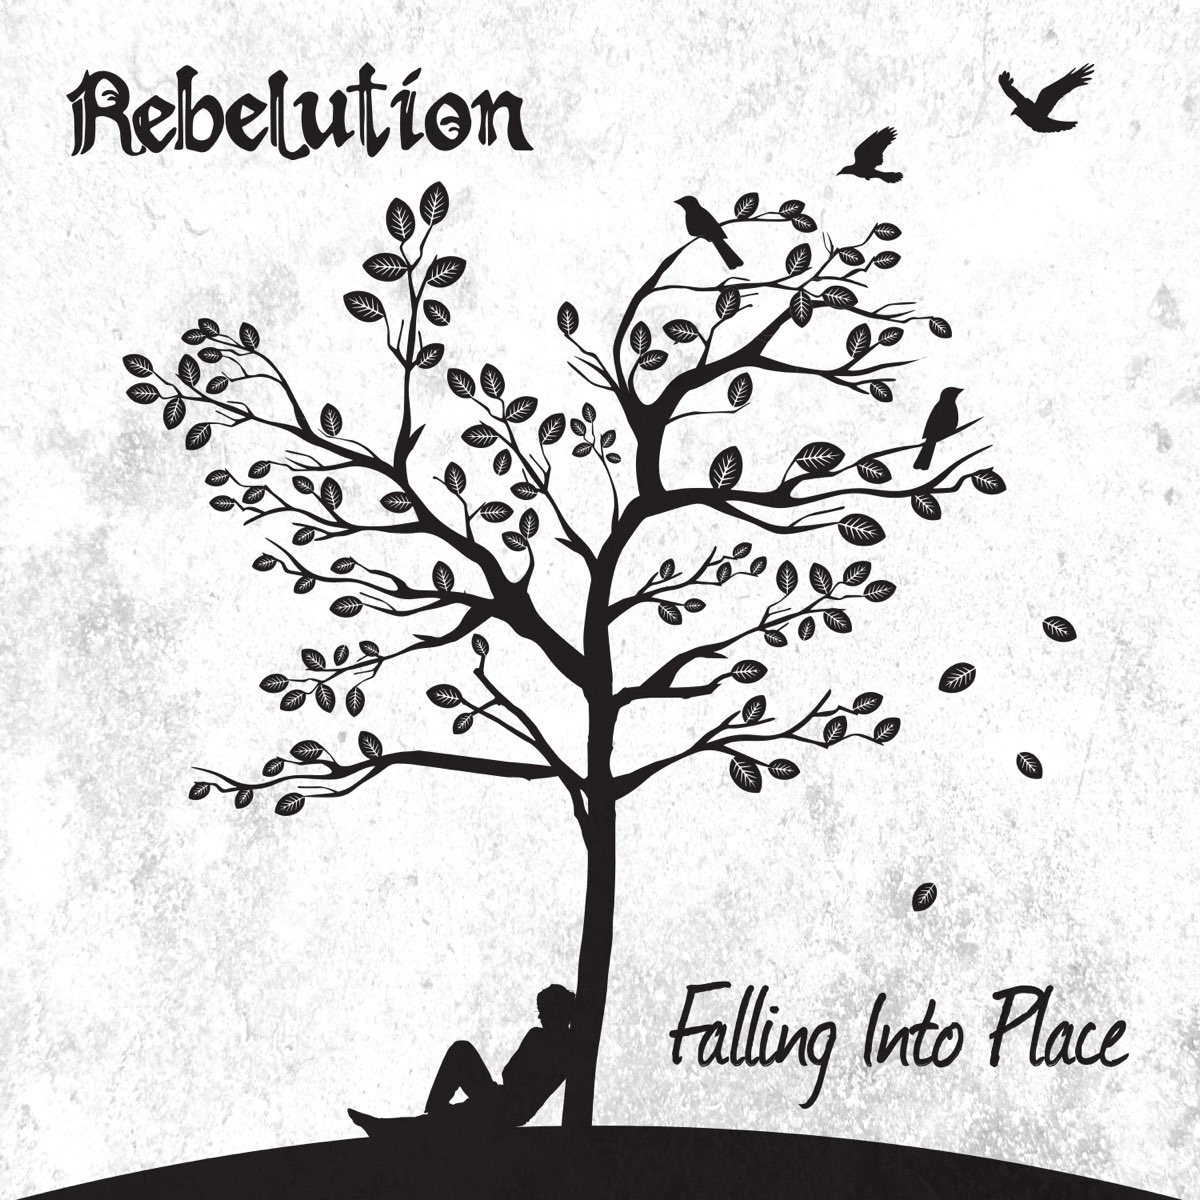 Rebelution Falling into Place cover artwork